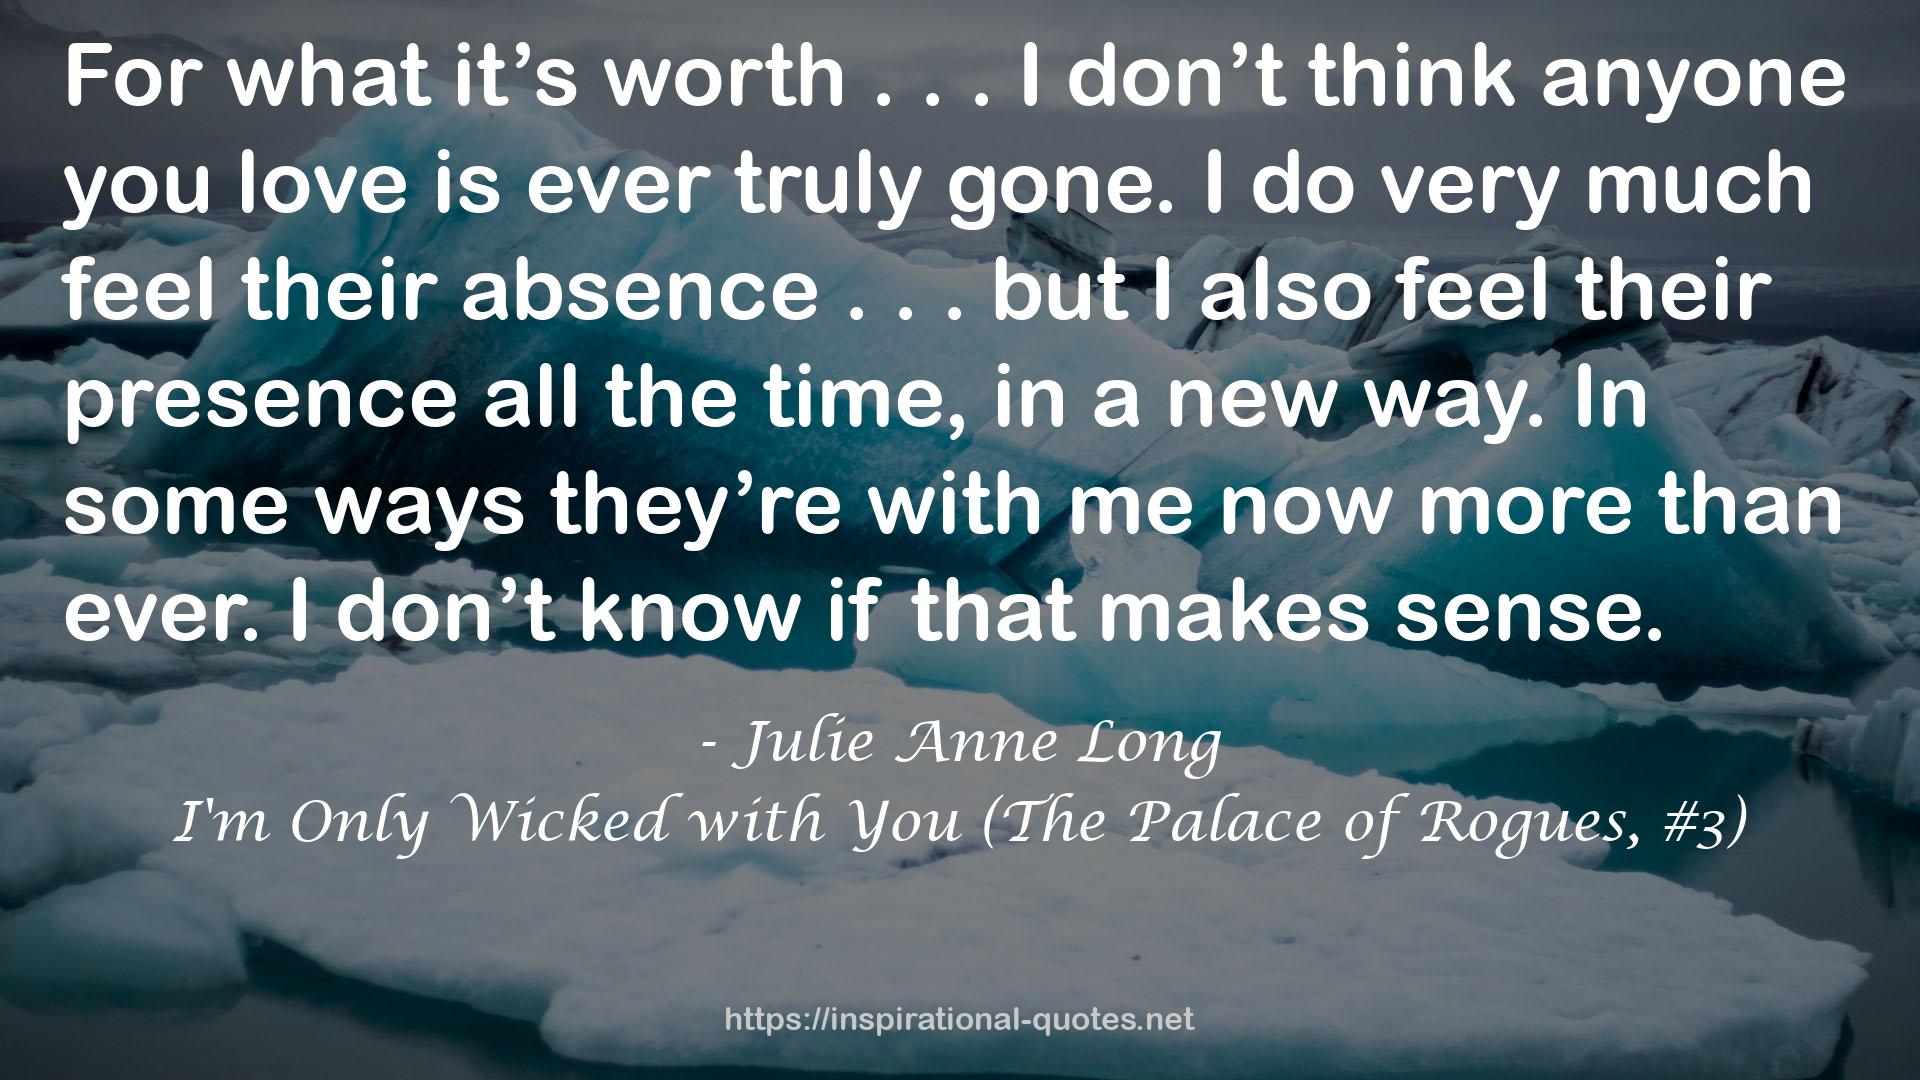 I'm Only Wicked with You (The Palace of Rogues, #3) QUOTES